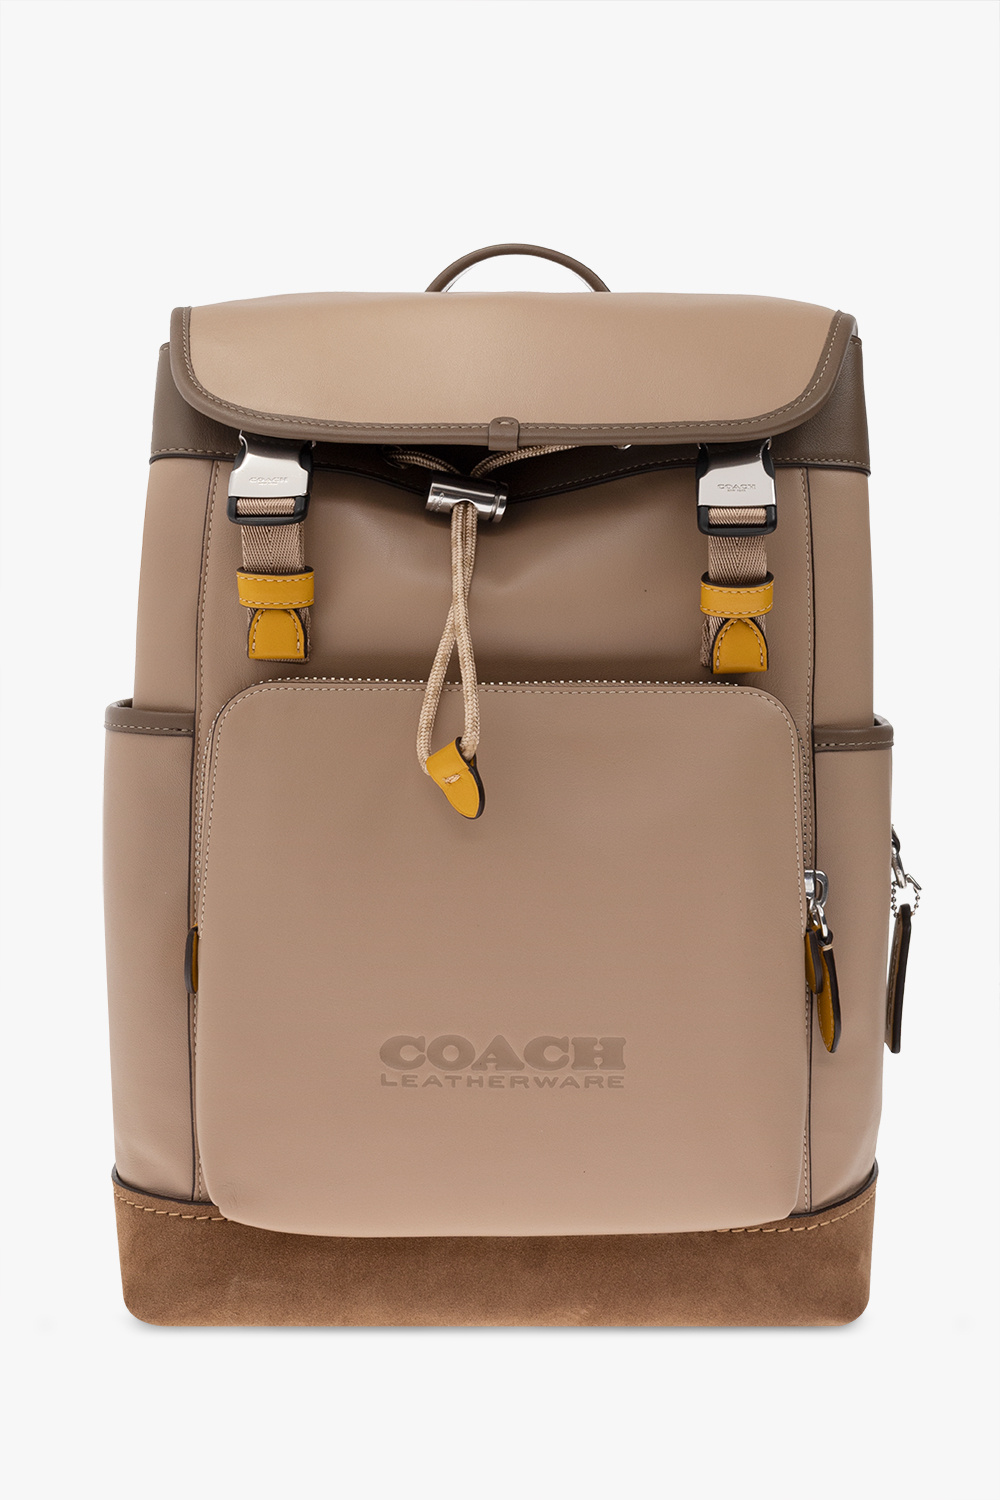 Coach Men's Patches Backpack, Men's Fashion, Bags, Backpacks on